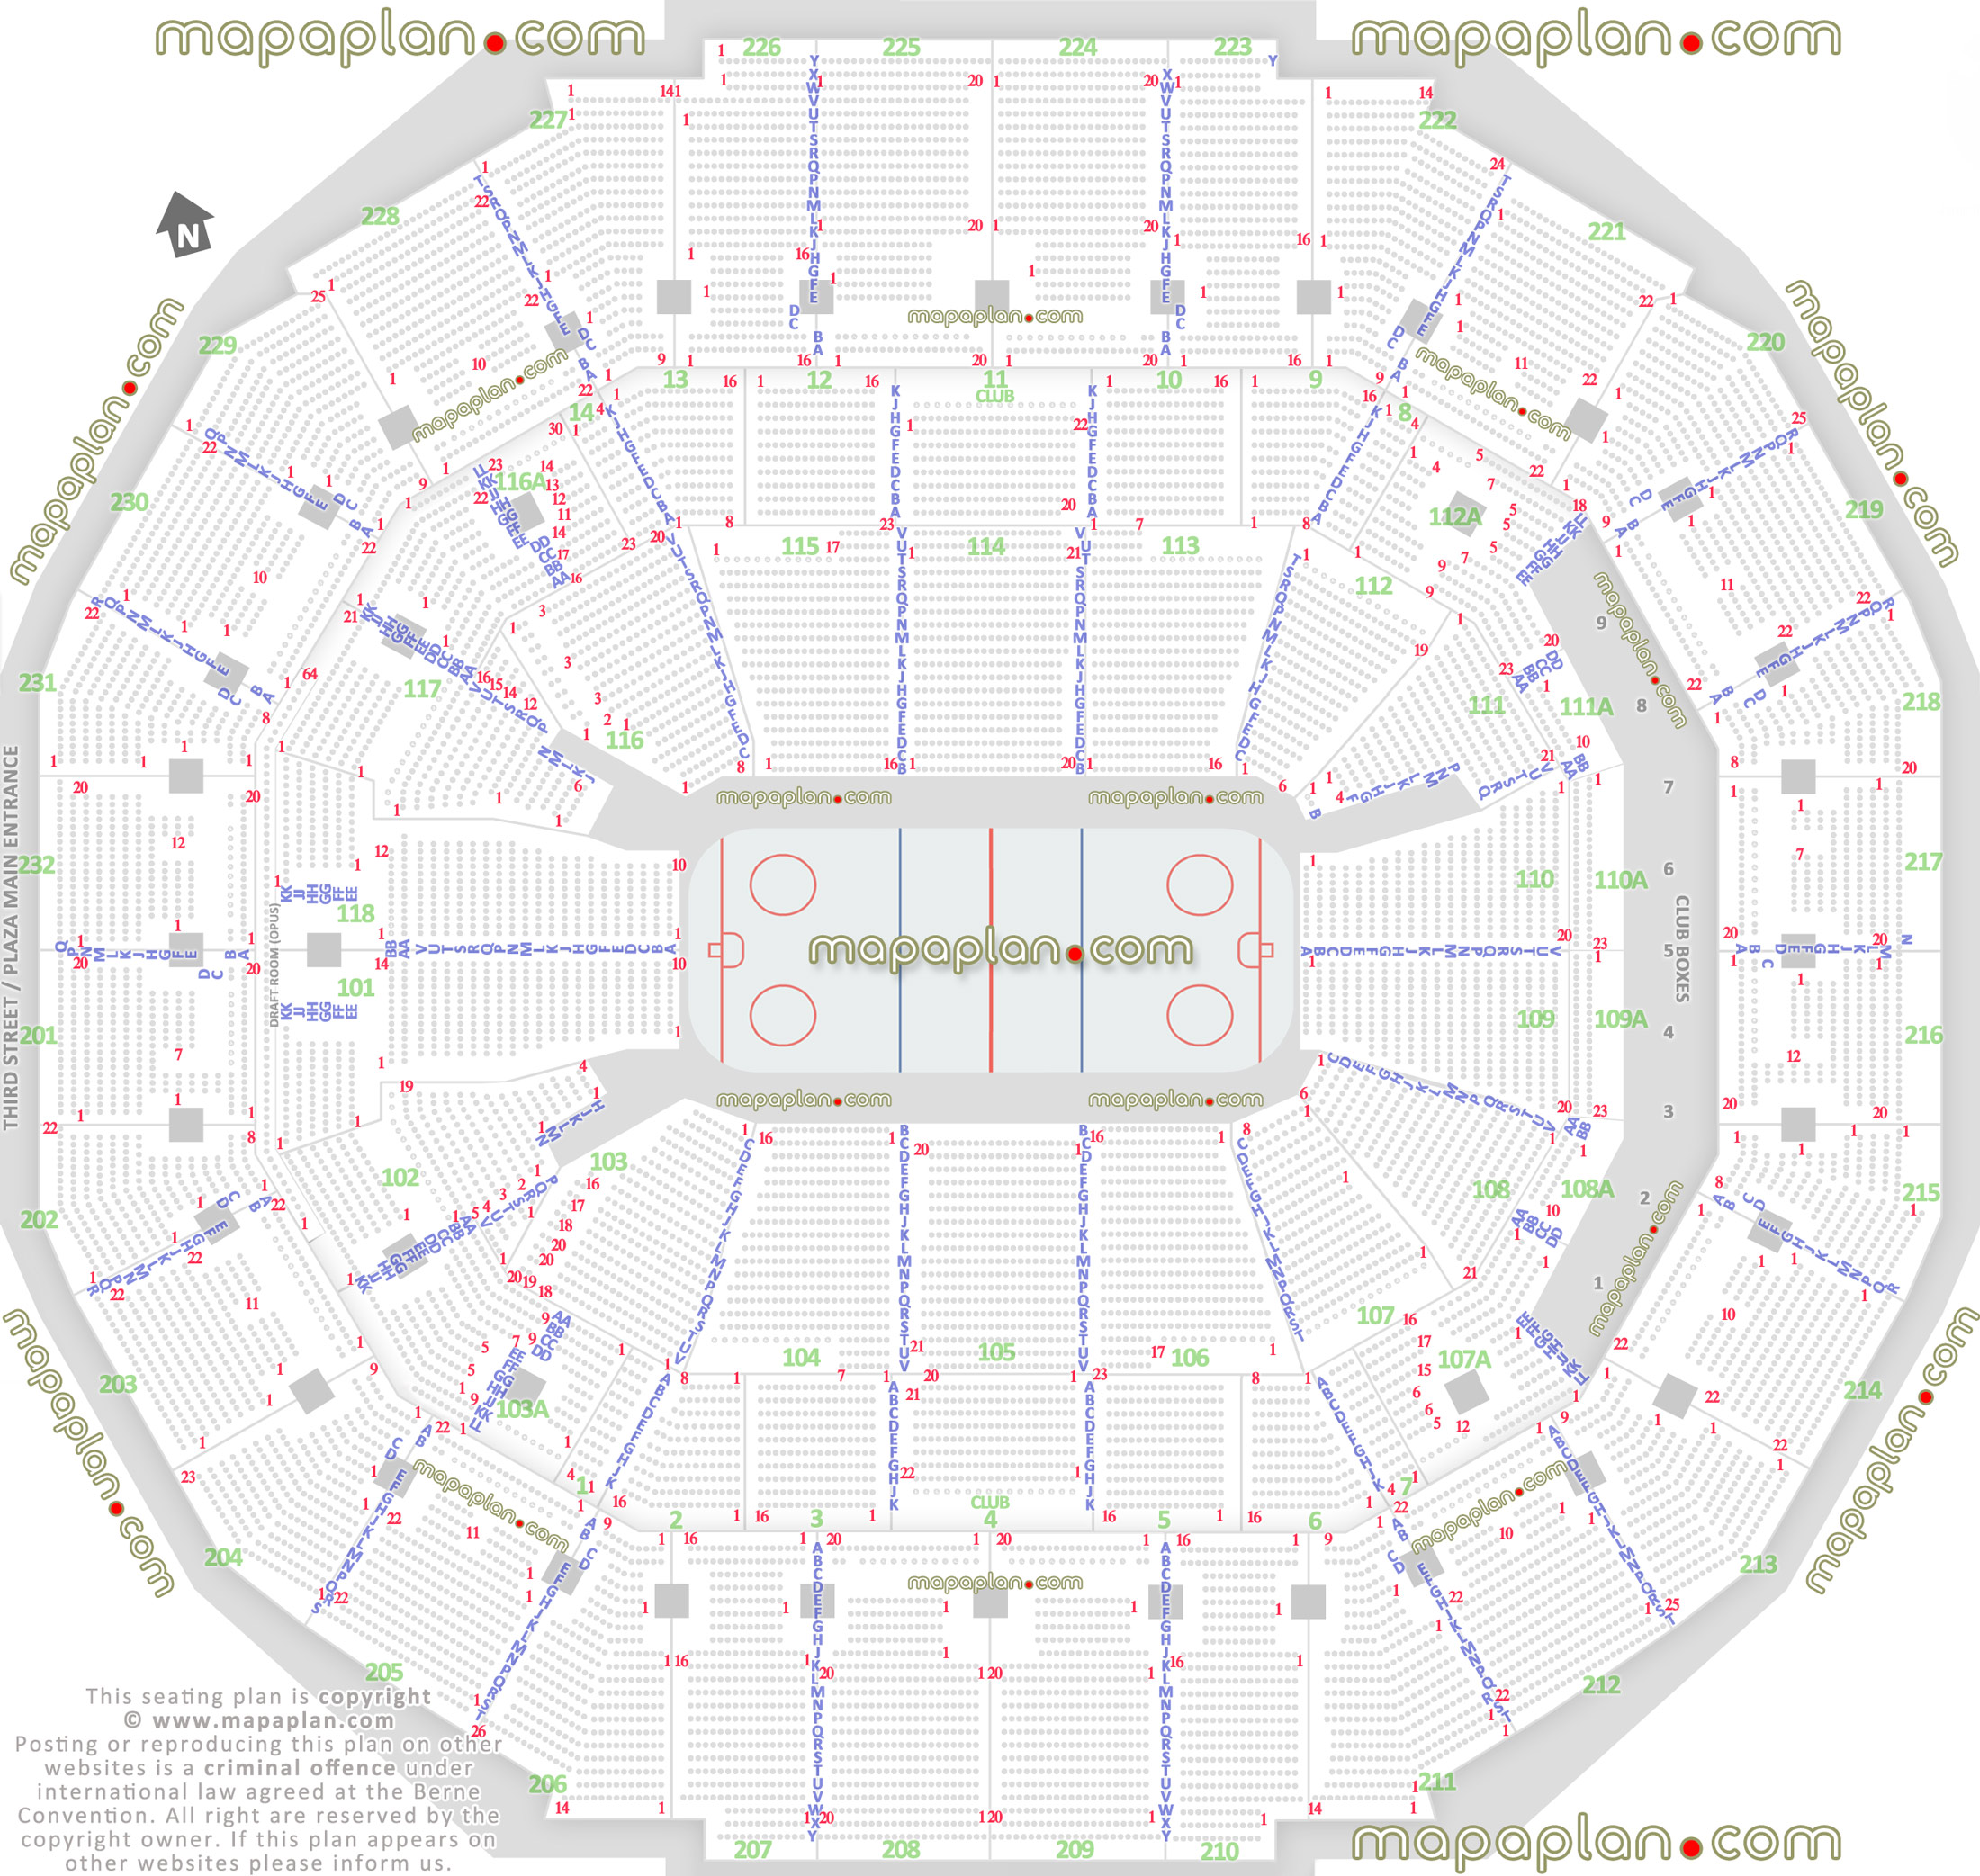 ice hockey arena seating capacity arrangement diagram fedex forum tennessee interactive virtual 3d detailed layout glass rinkside plaza club terrace level stadium bowl sections 201 202 203 204 205 206 207 208 209 210 211 212 213 214 215 216 217 218 219 220 221 222 223 224 225 226 227 228 229 230 231 232 Memphis FedExForum seating chart